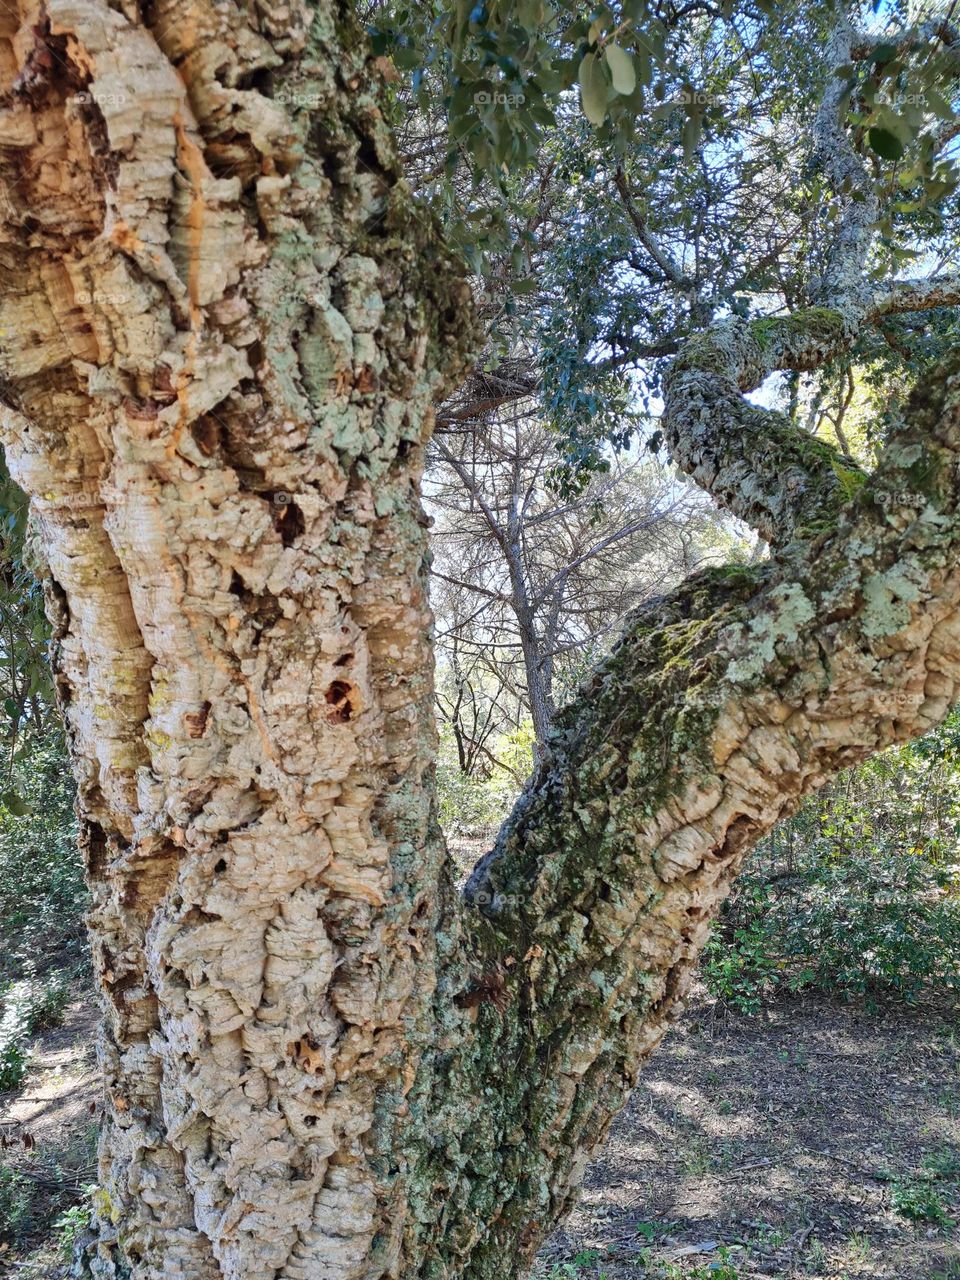 Trunk trees